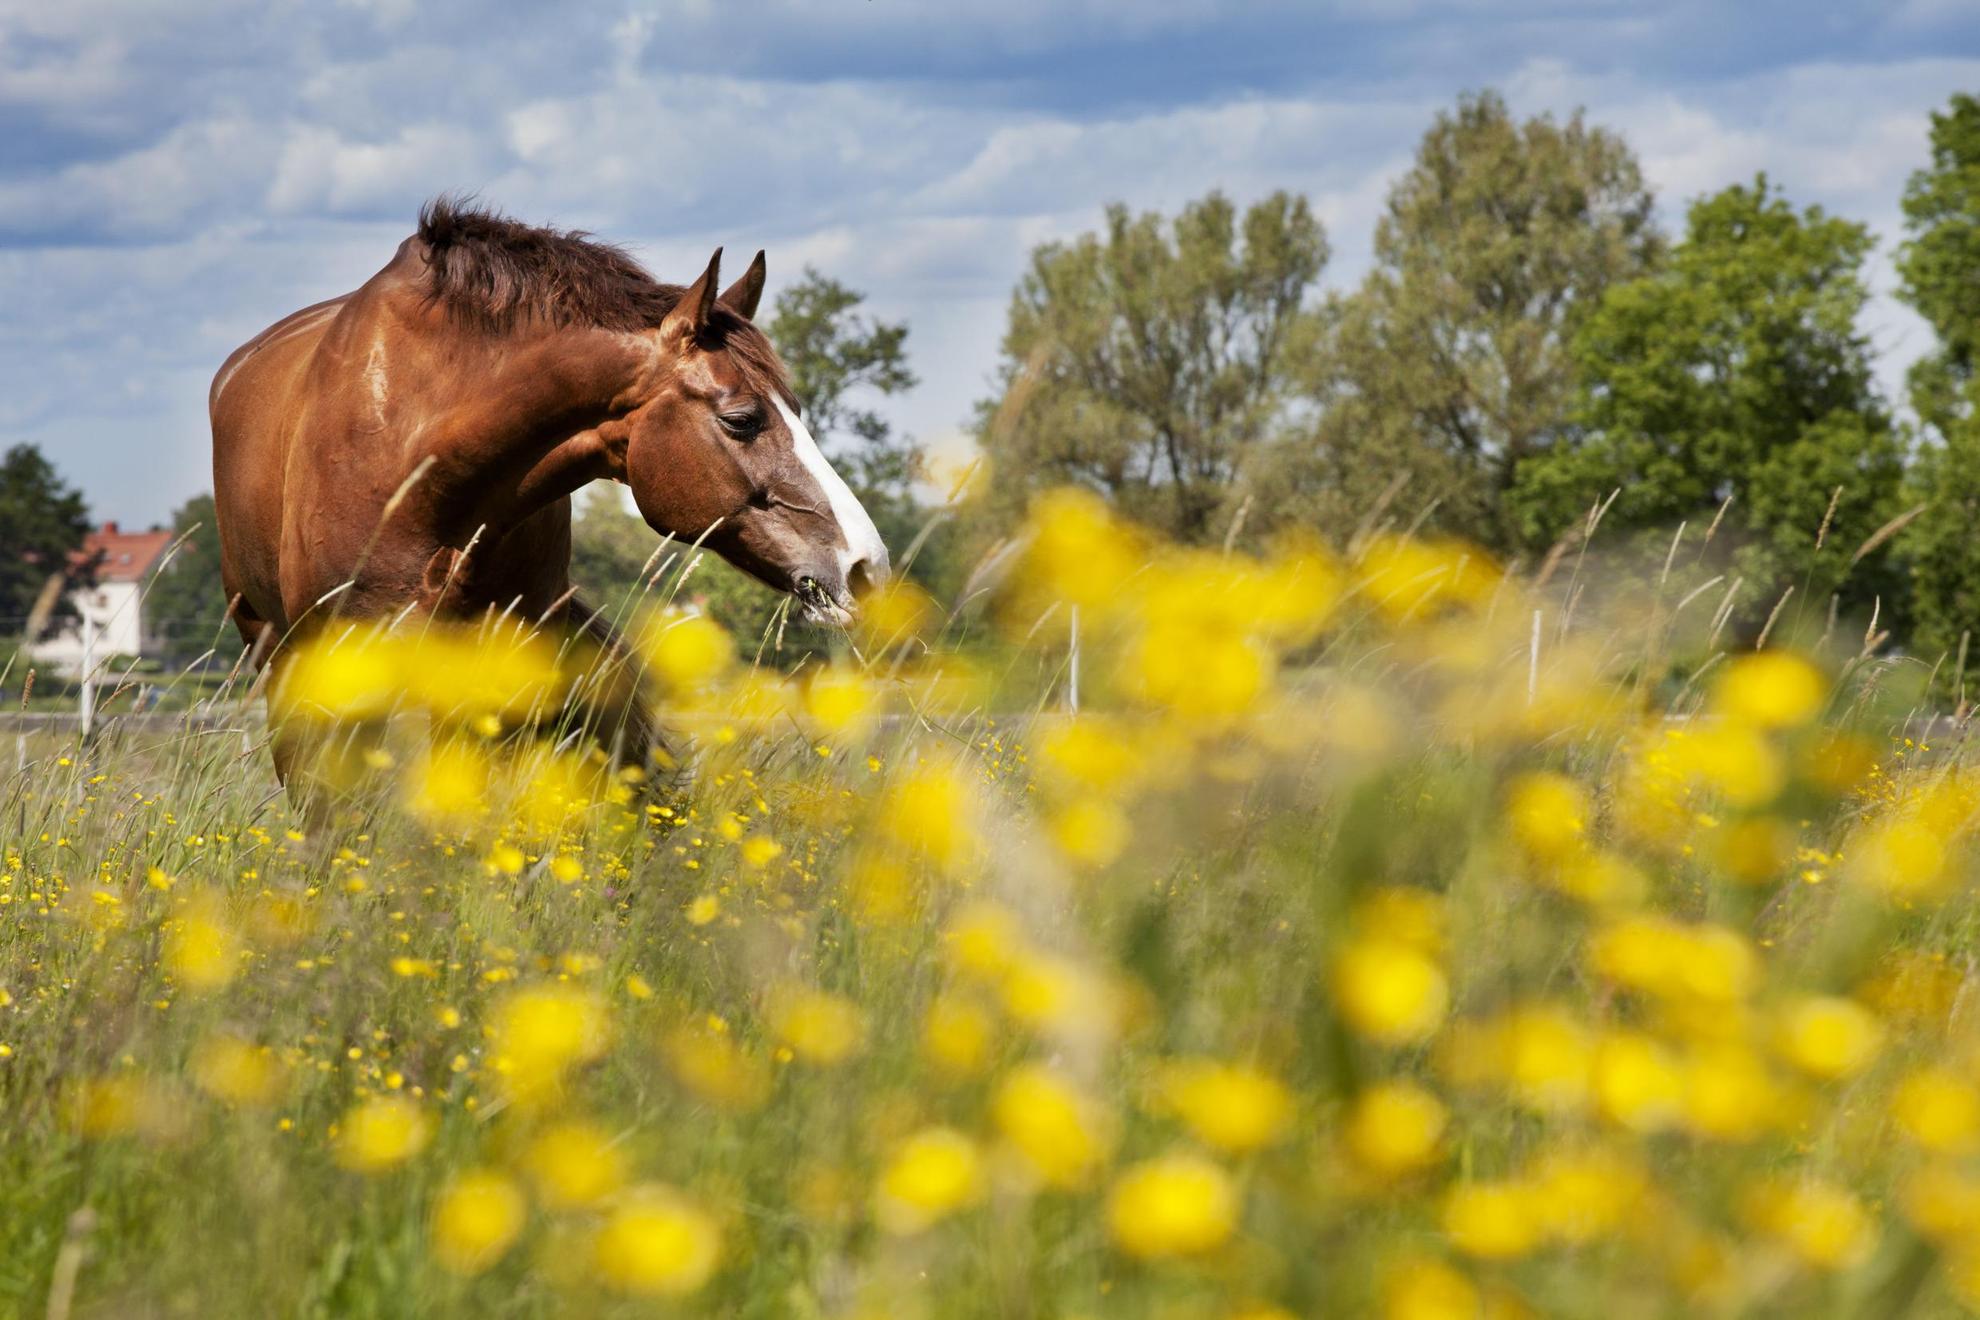 A horse is standing in a field in Sweden grazing. There's a farm house in the background and wild flowers in the foreground.